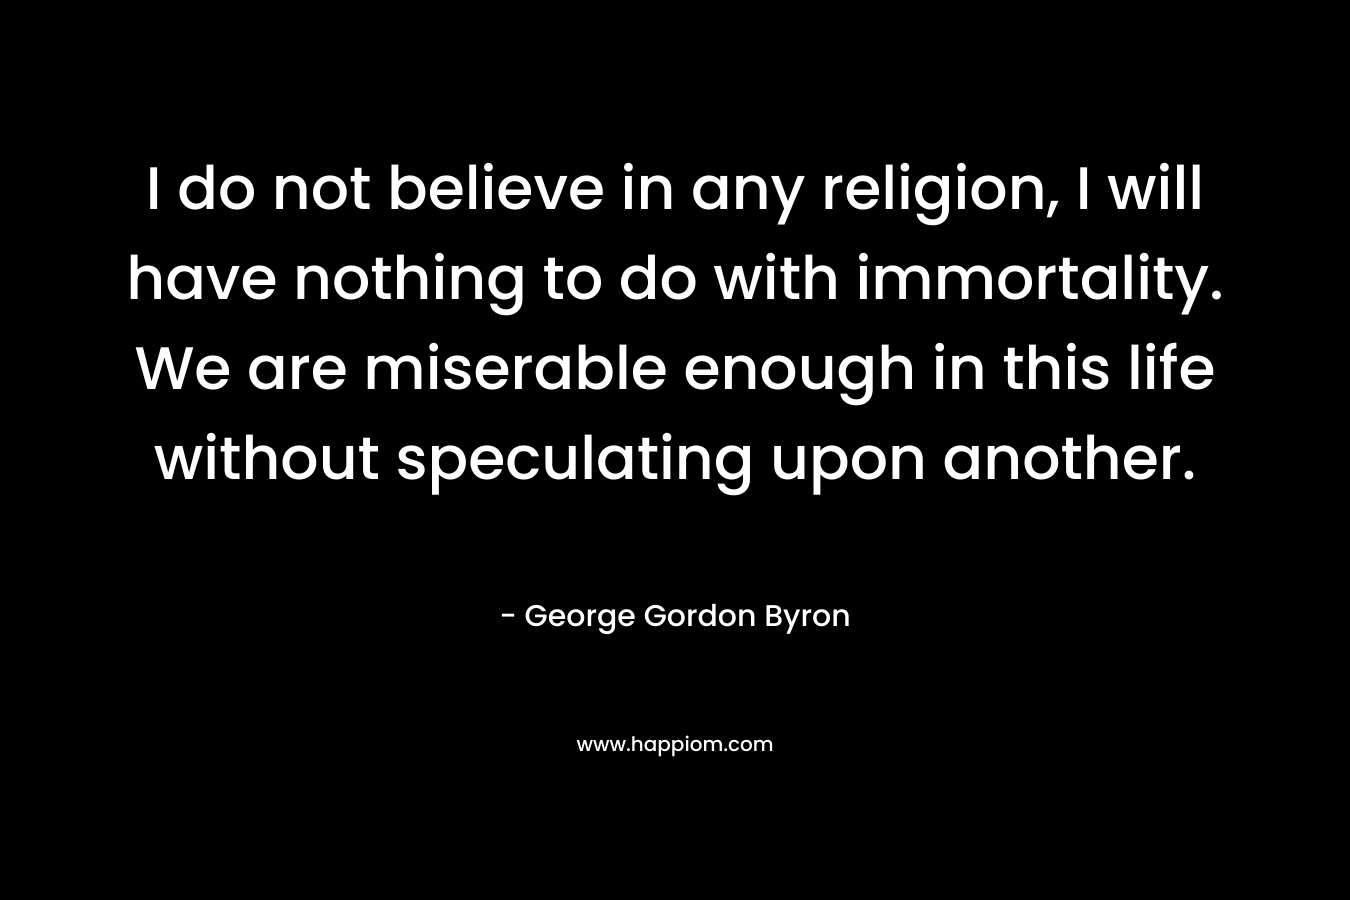 I do not believe in any religion, I will have nothing to do with immortality. We are miserable enough in this life without speculating upon another.